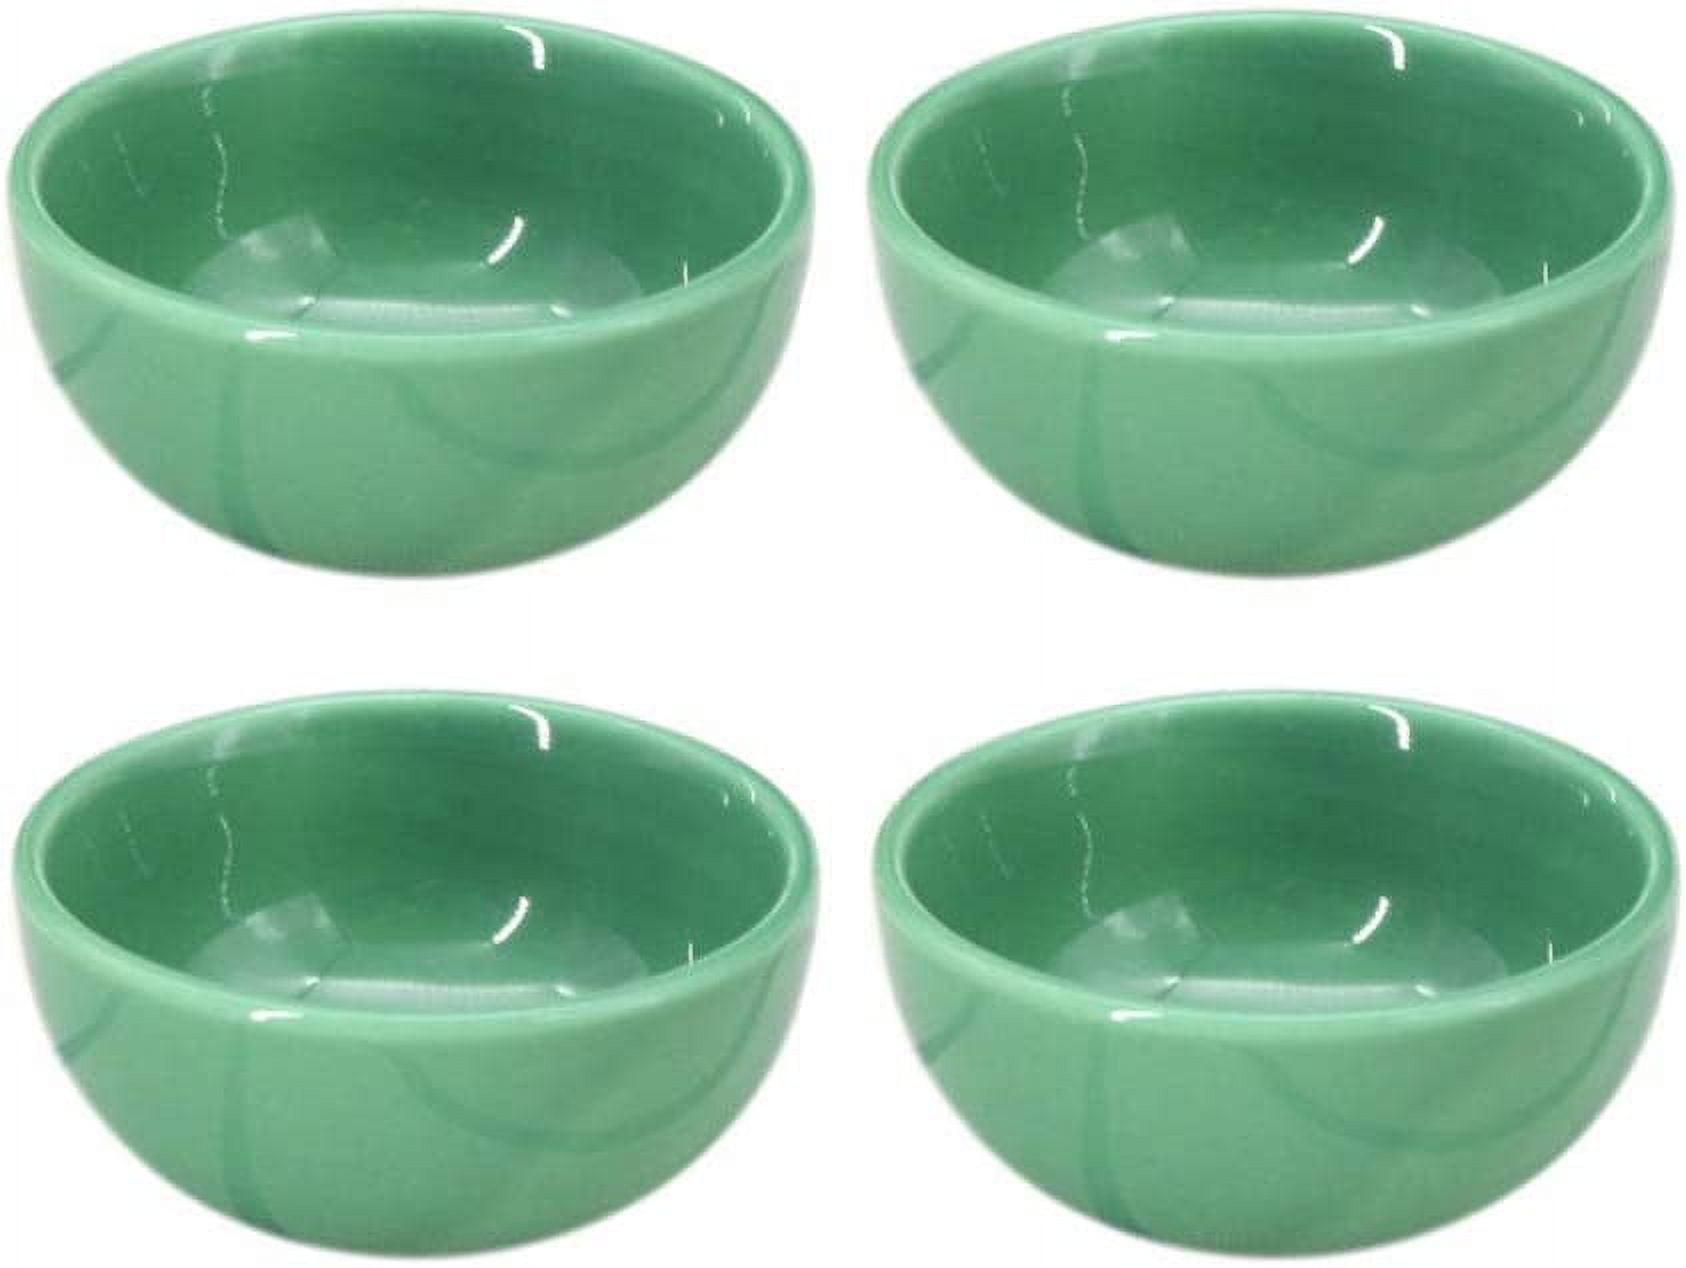 JHNIF 12pcs Clear Glass Soy Sauce Dipping Bowls Side Dishes for Snack Sushi  Fruit Appetizer Dessert. 3 Inch